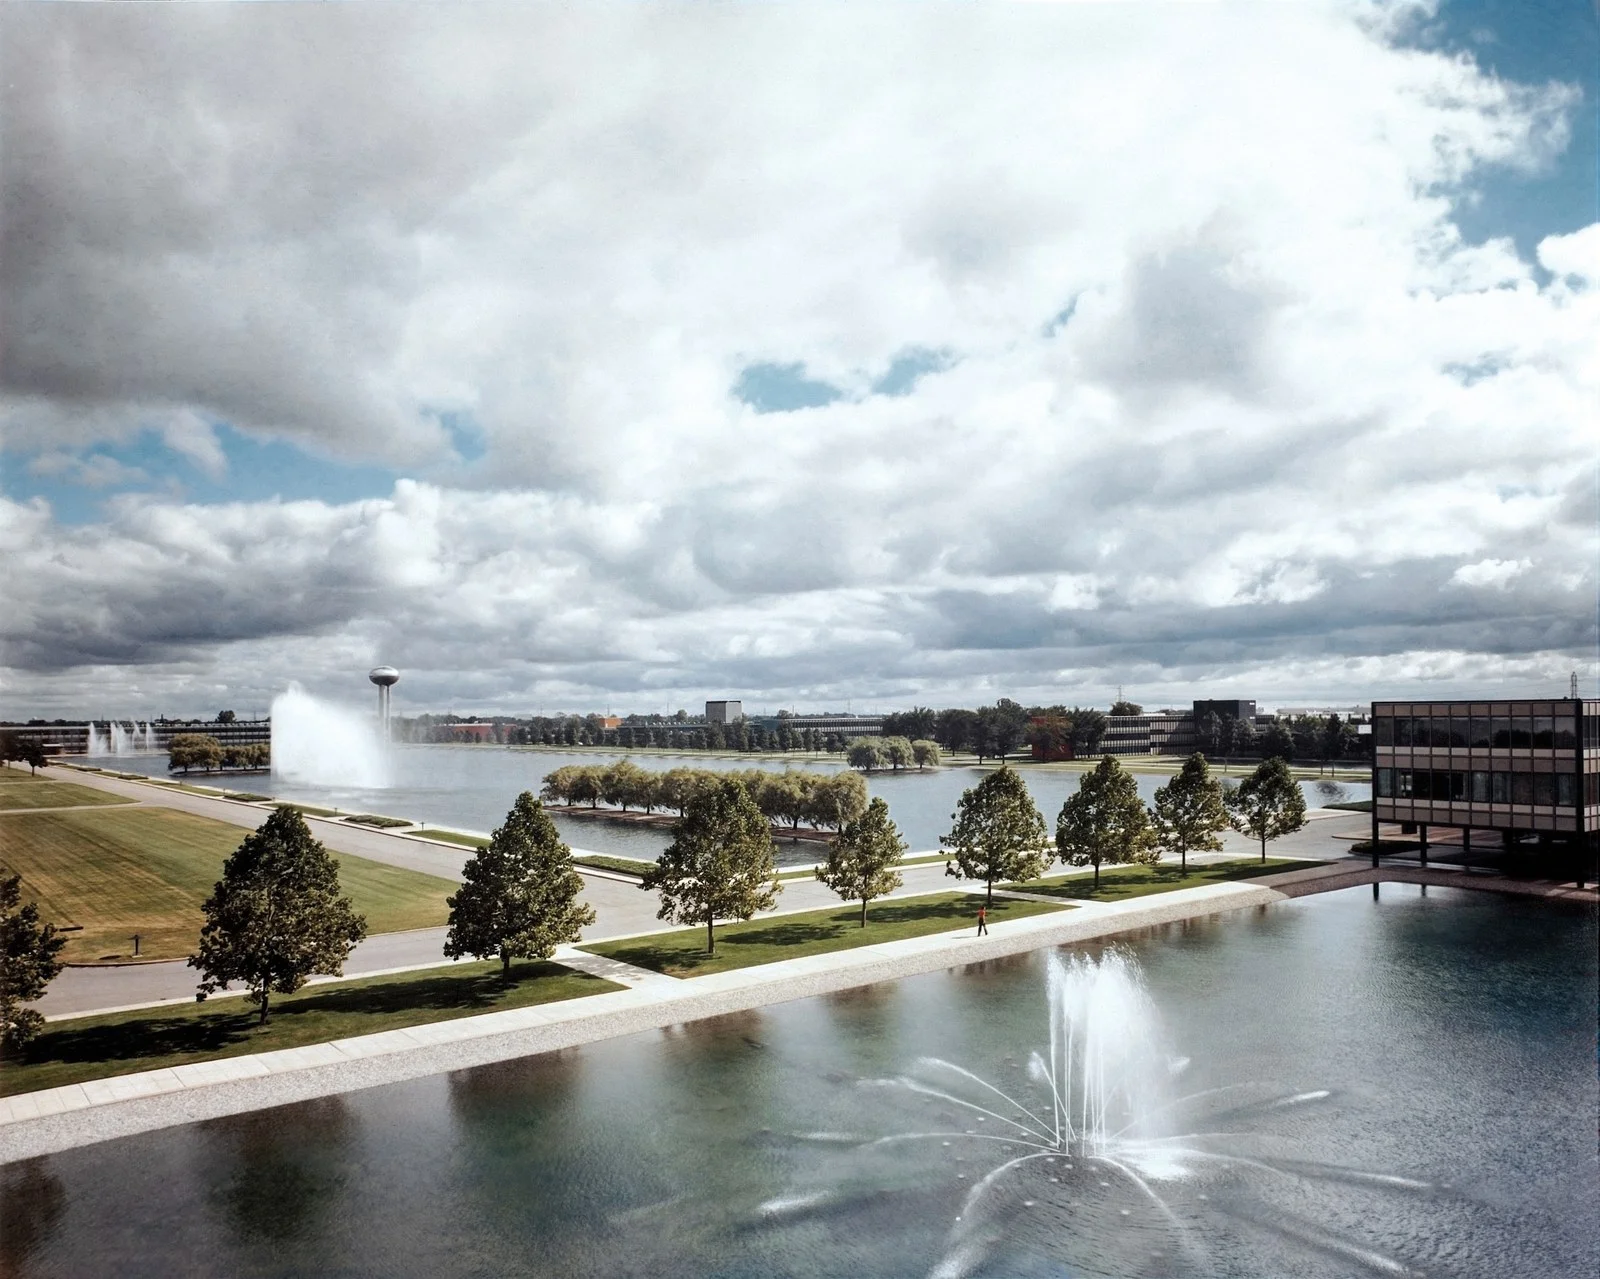 The Lake, a large body of water contained within the General Motors Technical Center campus